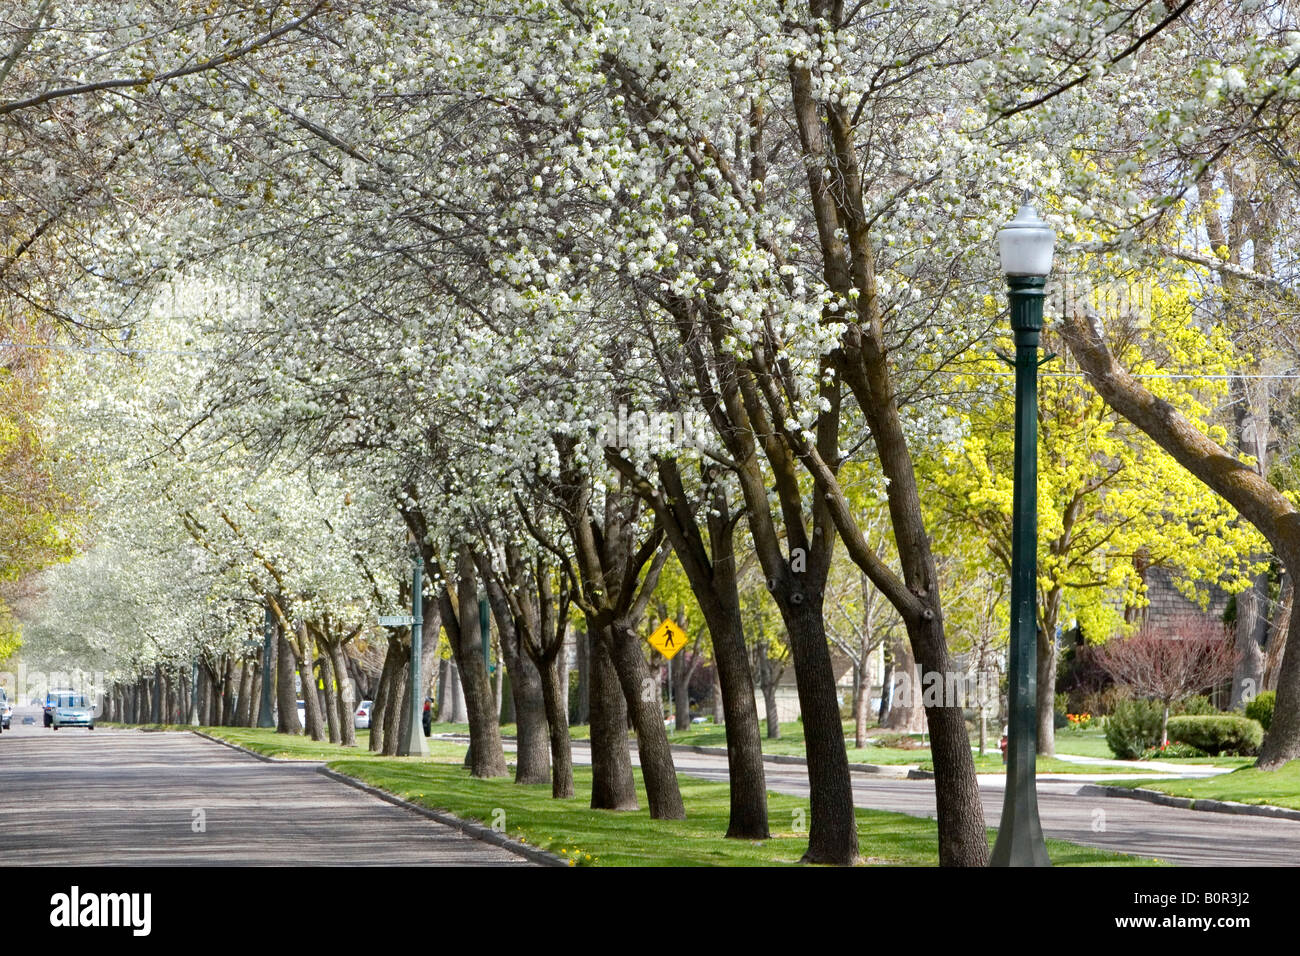 Harrison Boulevard lined with pear trees in bloom in Boise Idaho Stock Photo